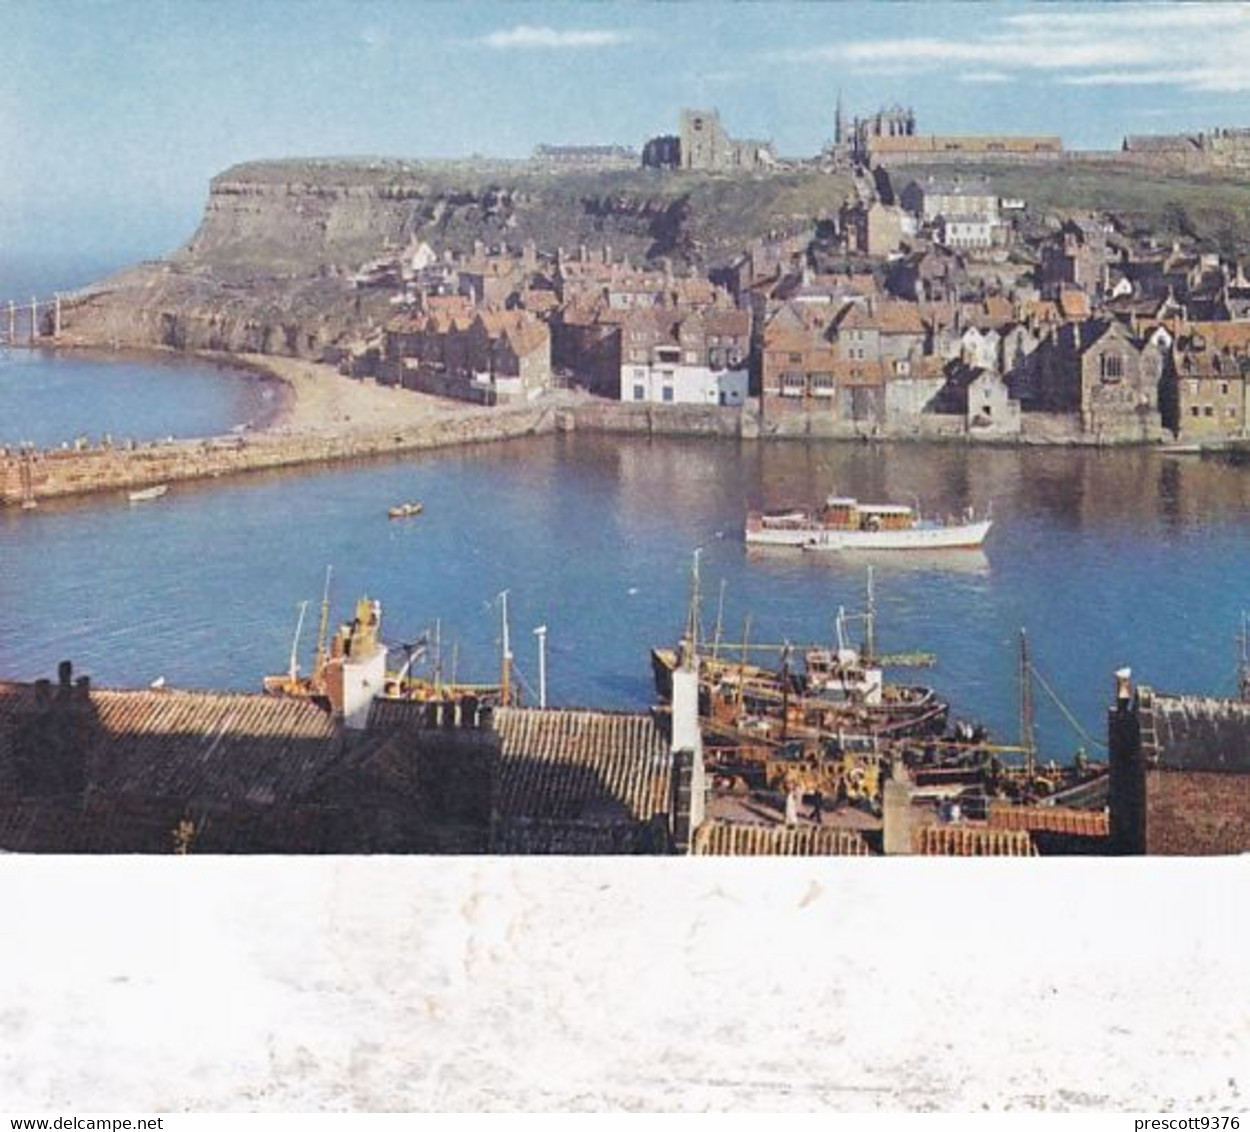 East Cliff & Old Town, Whitby - Unused Postcard - Yorkshire - J Arthur Dixon - Church - Whitby